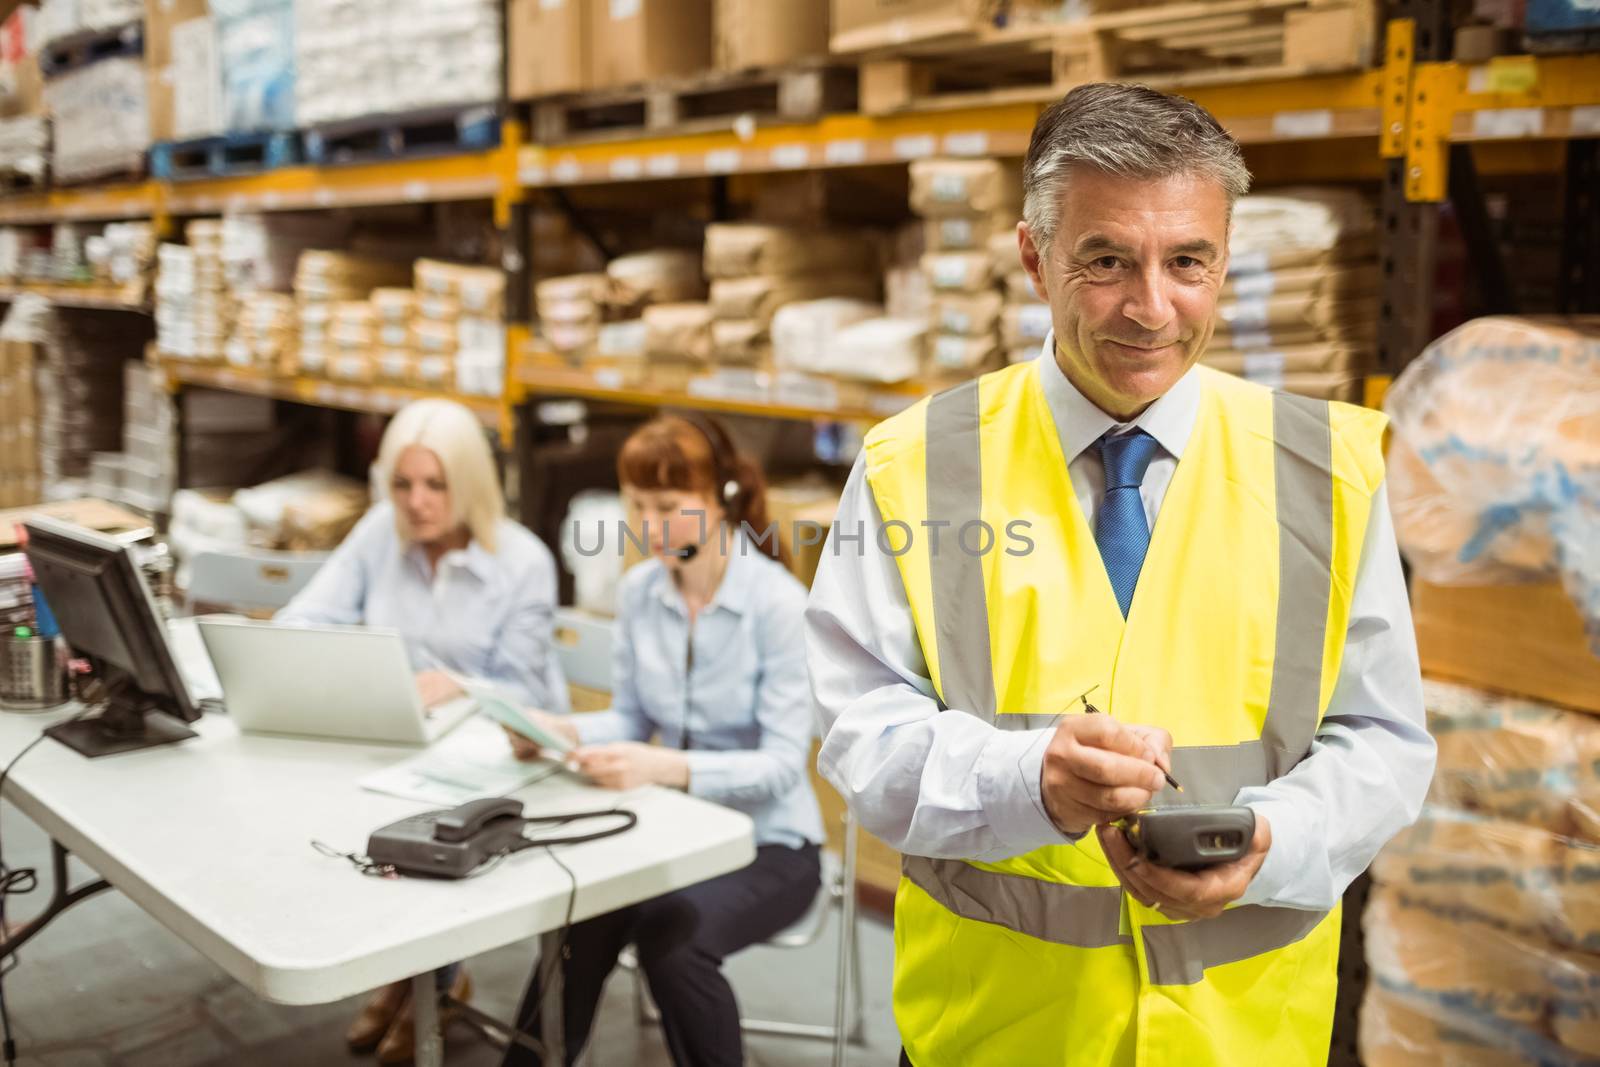 Smiling manager wearing yellow vest using handheld in a large warehouse